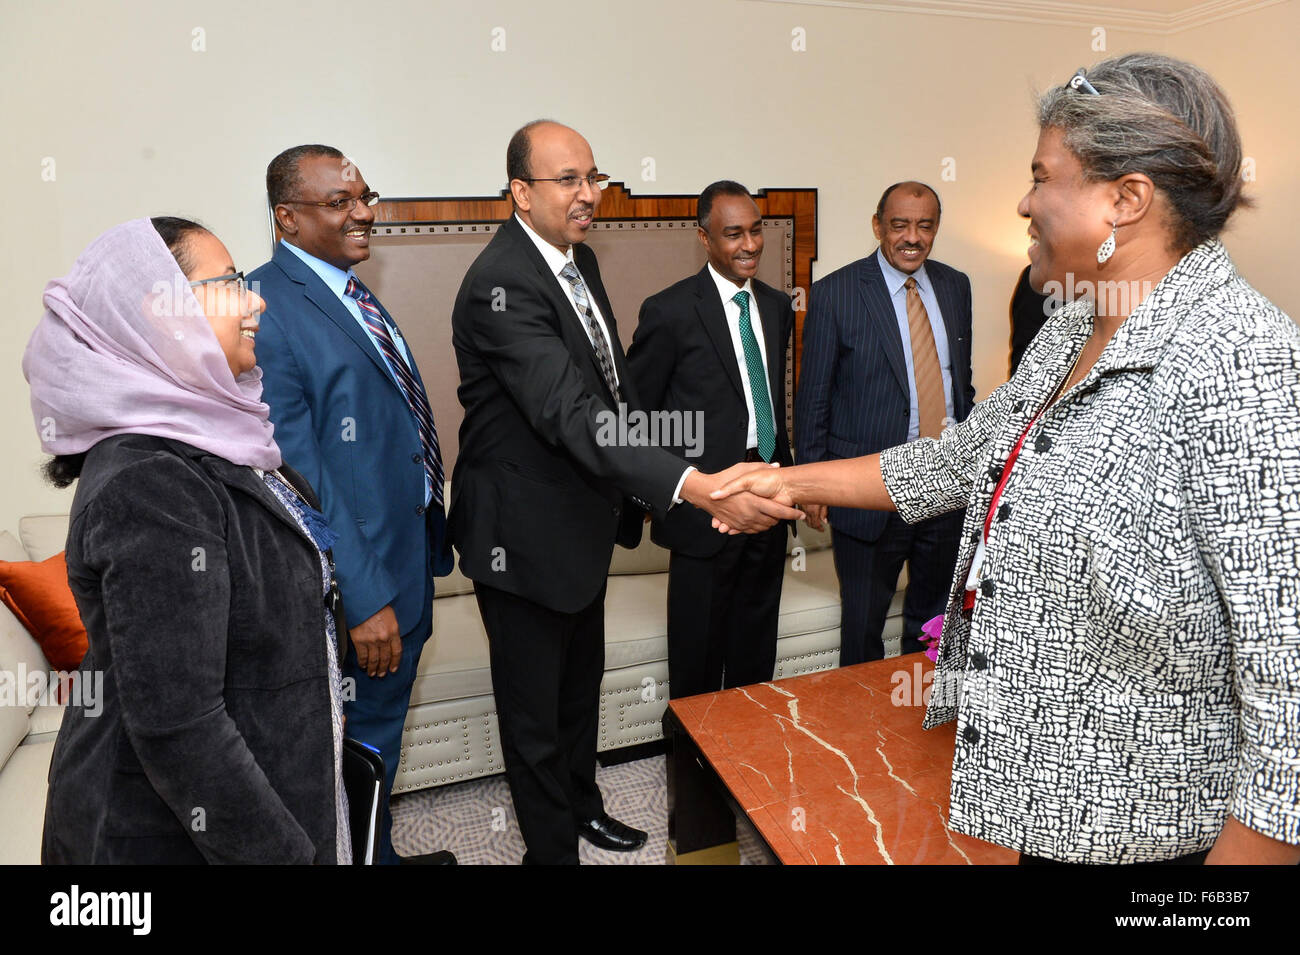 Assistant Secretary Thomas-Greenfield Greets the Sudanese Delegation Before Secretary Kerry's Meeting With Sudanese Foreign Minister Ghandour in New York City Stock Photo